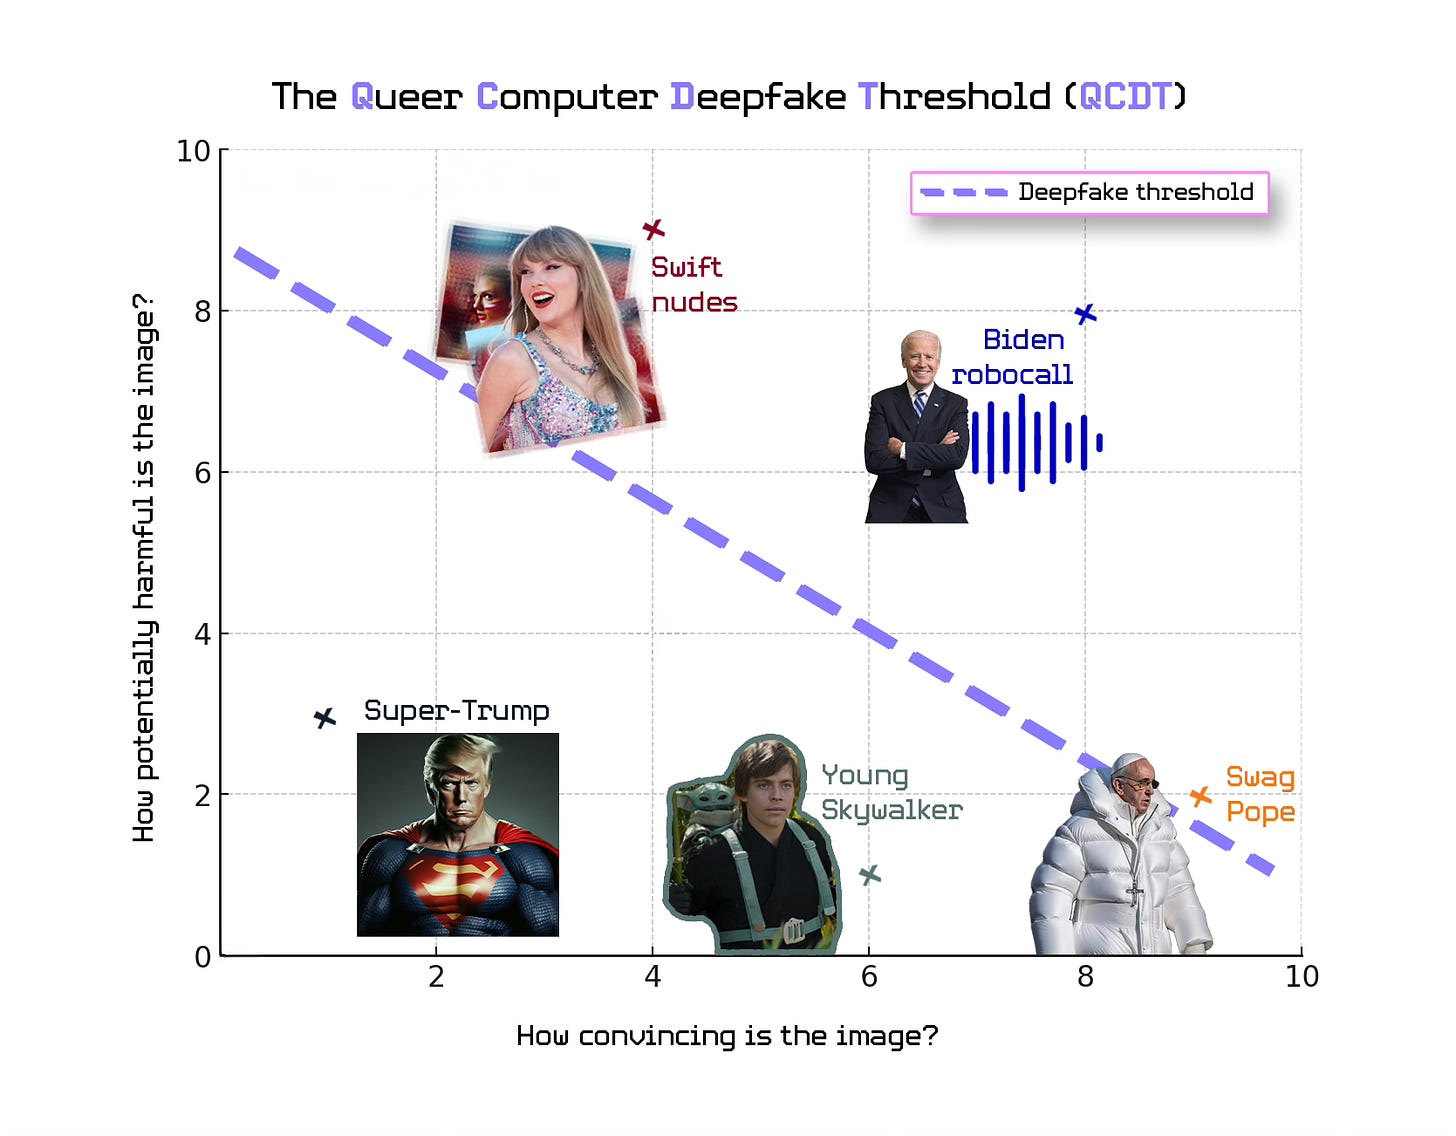 A graph titled 'The Queer Computer Deepfake Threshold (QCDT)' with two axes: 'How convincing is the image?' on the x-axis, ranging from 0 to 10, and 'How potentially harmful is the image?' on the y-axis, also ranging from 0 to 10. Different icons with labels are plotted on the graph. At the lower left, labeled 'Super-Trump,' is an icon of a superhero with Trump's face. Moving to the right, 'Young Skywalker' represents a figure resembling a young Luke Skywalker. Further to the right is 'Swag Pope,' an icon of a figure dressed like the Pope with a swag style. At the upper right, 'Biden robocall' shows a smiling Joe Biden with sound waves emanating from him. Above in the center is 'Swift nudes,' with a sparkly icon of Taylor Swift. A dashed line with the label 'Deepfake threshold' slopes down from left to right, indicating the boundary between non-harmful and harmful deepfakes.